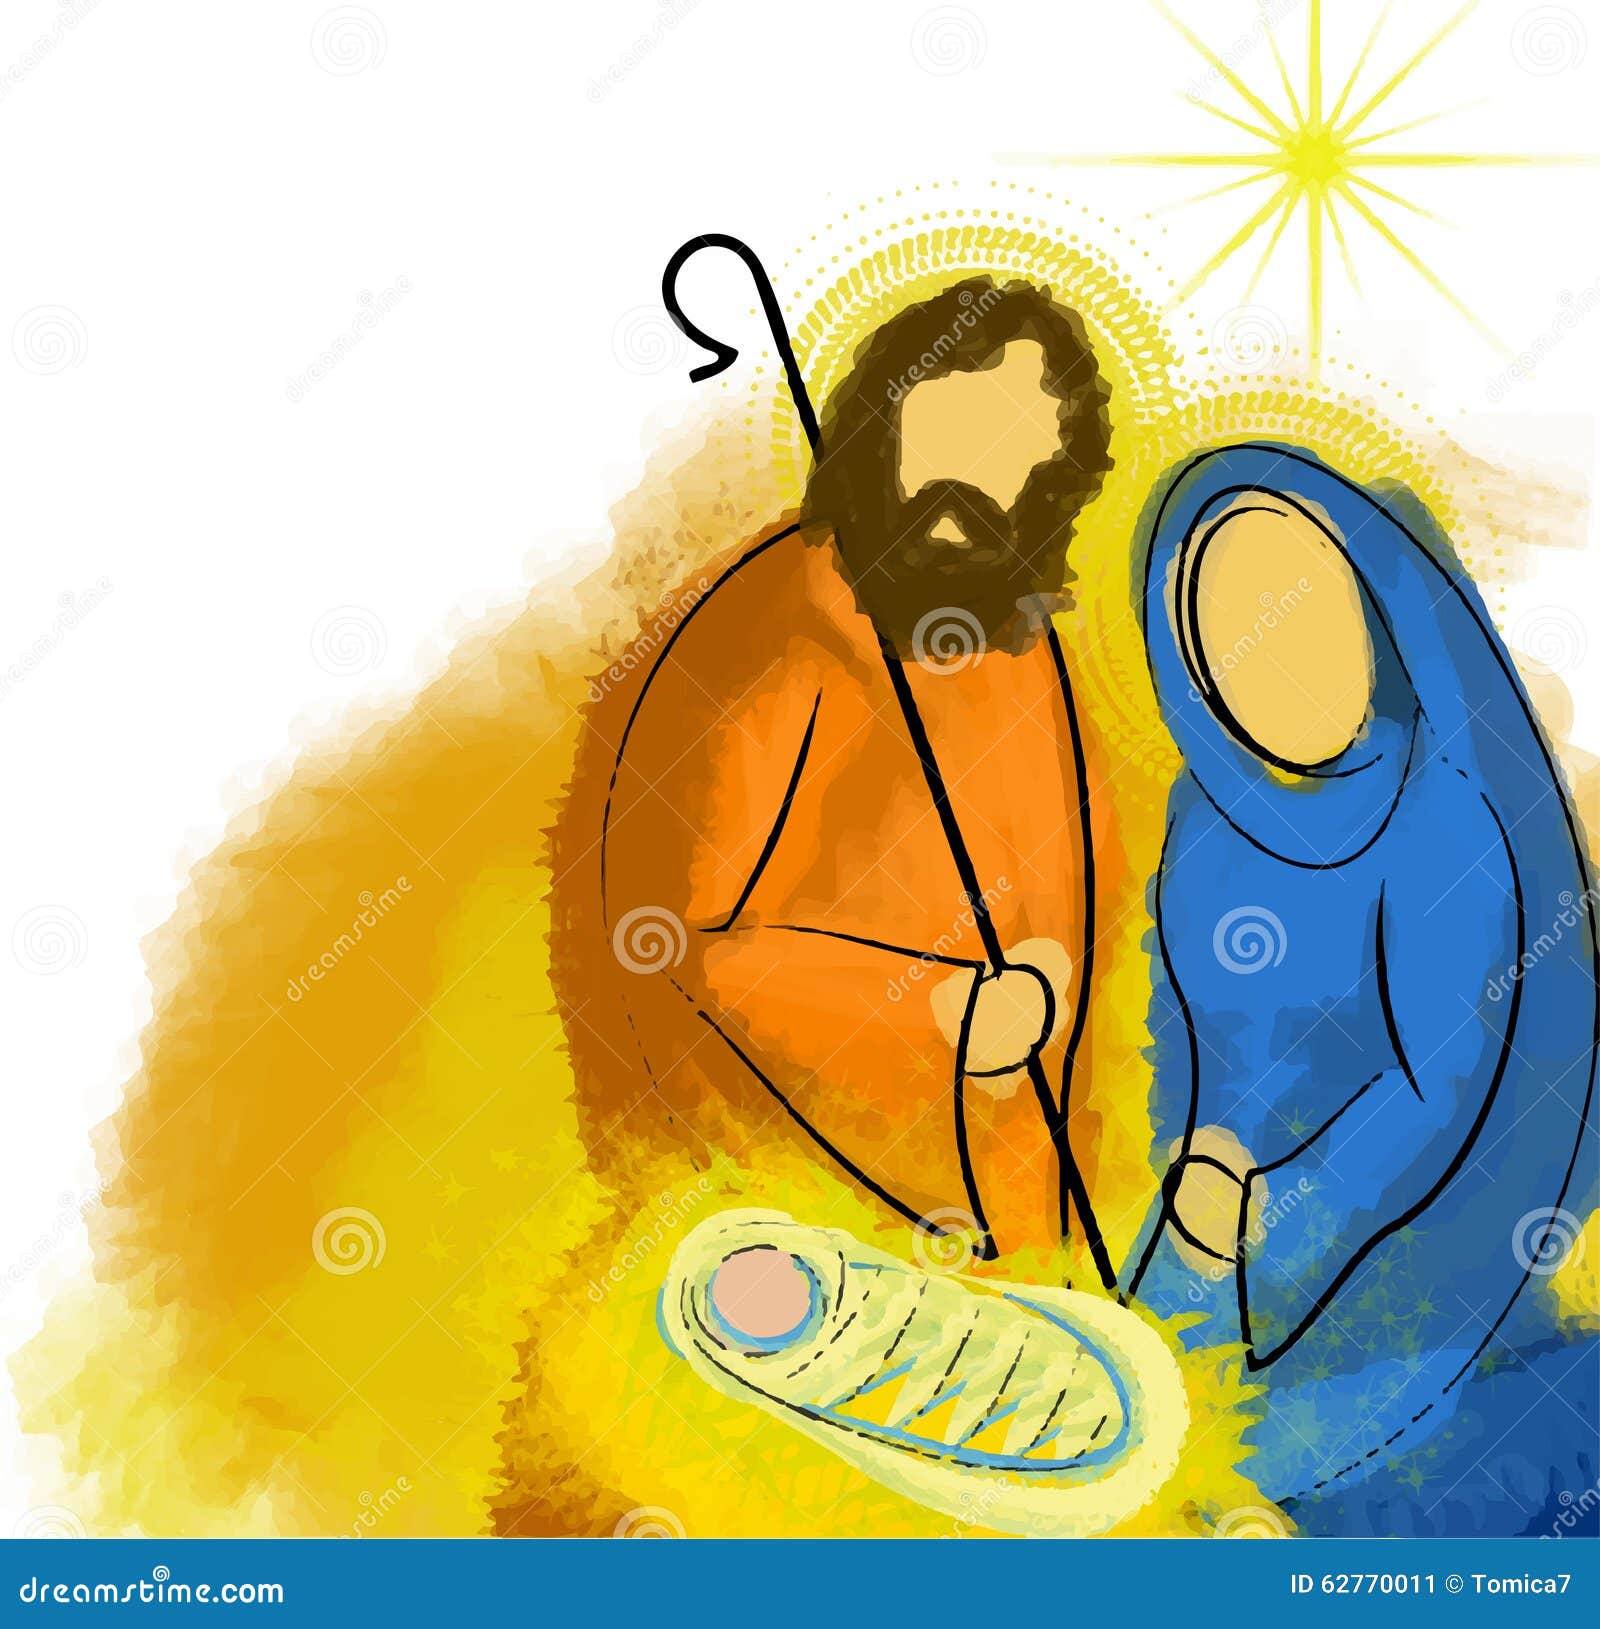 free clip art of the holy family - photo #39